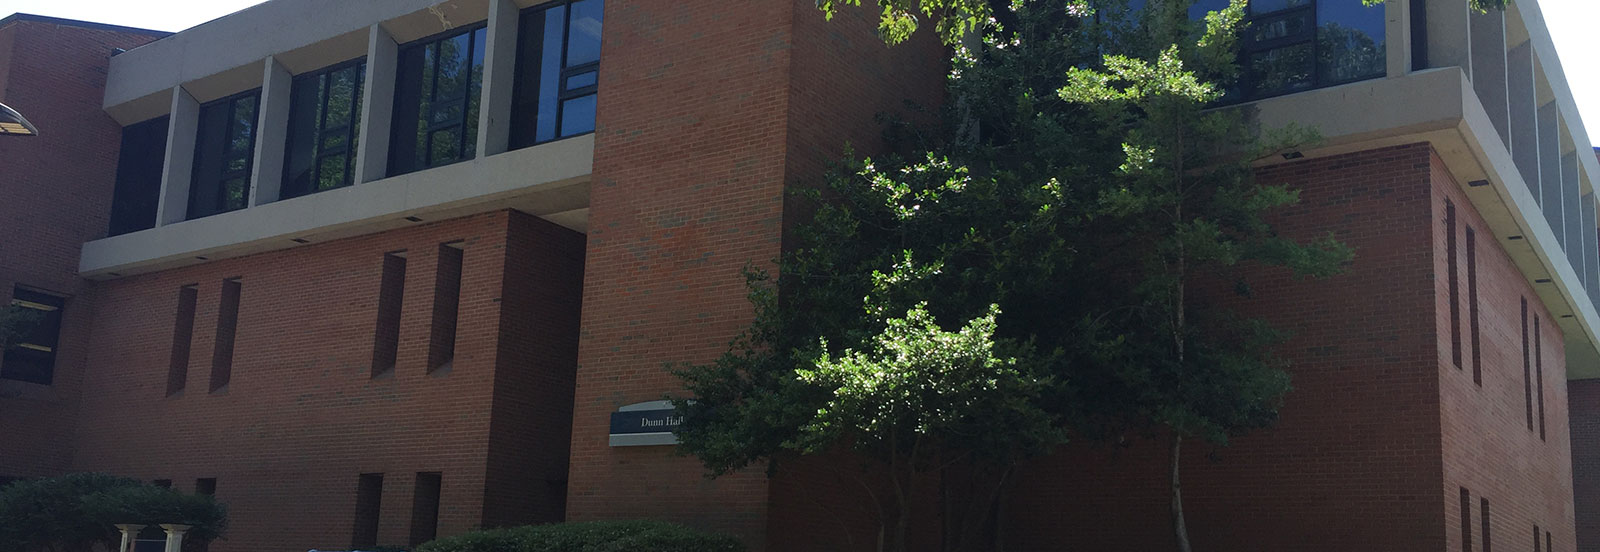 The Department of Mathematical Sciences is located in Dunn Hall across from the Library on the main UofM campus.